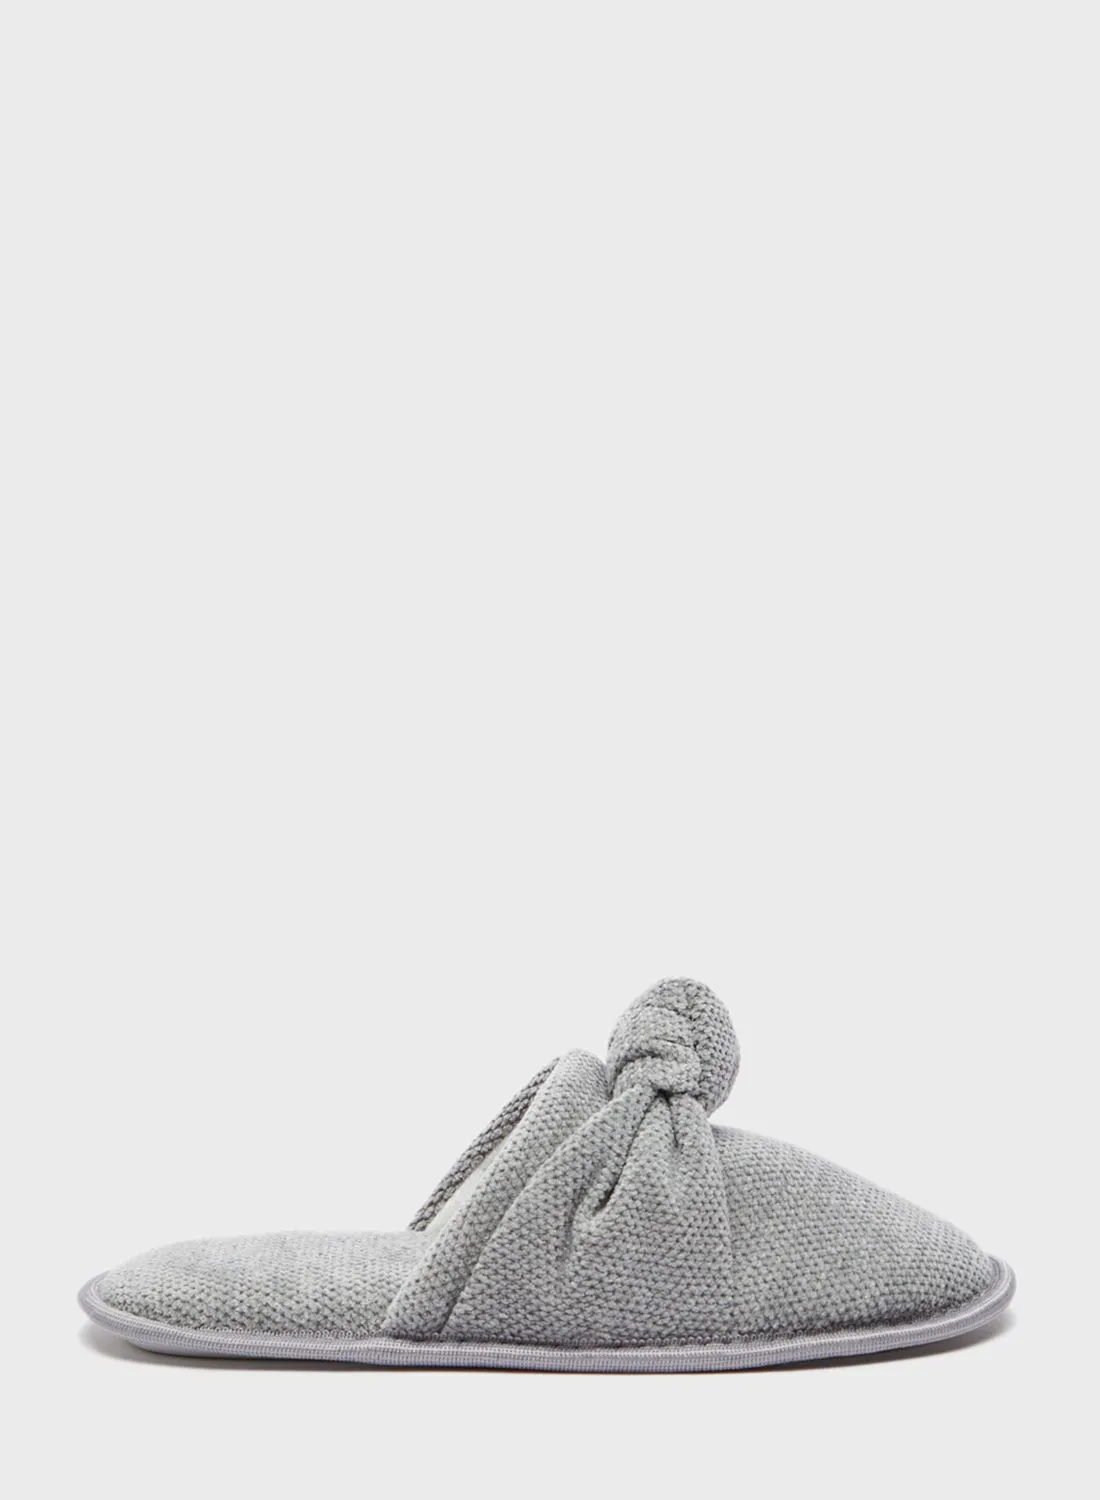 shoexpress Casual Bedroom Slippers